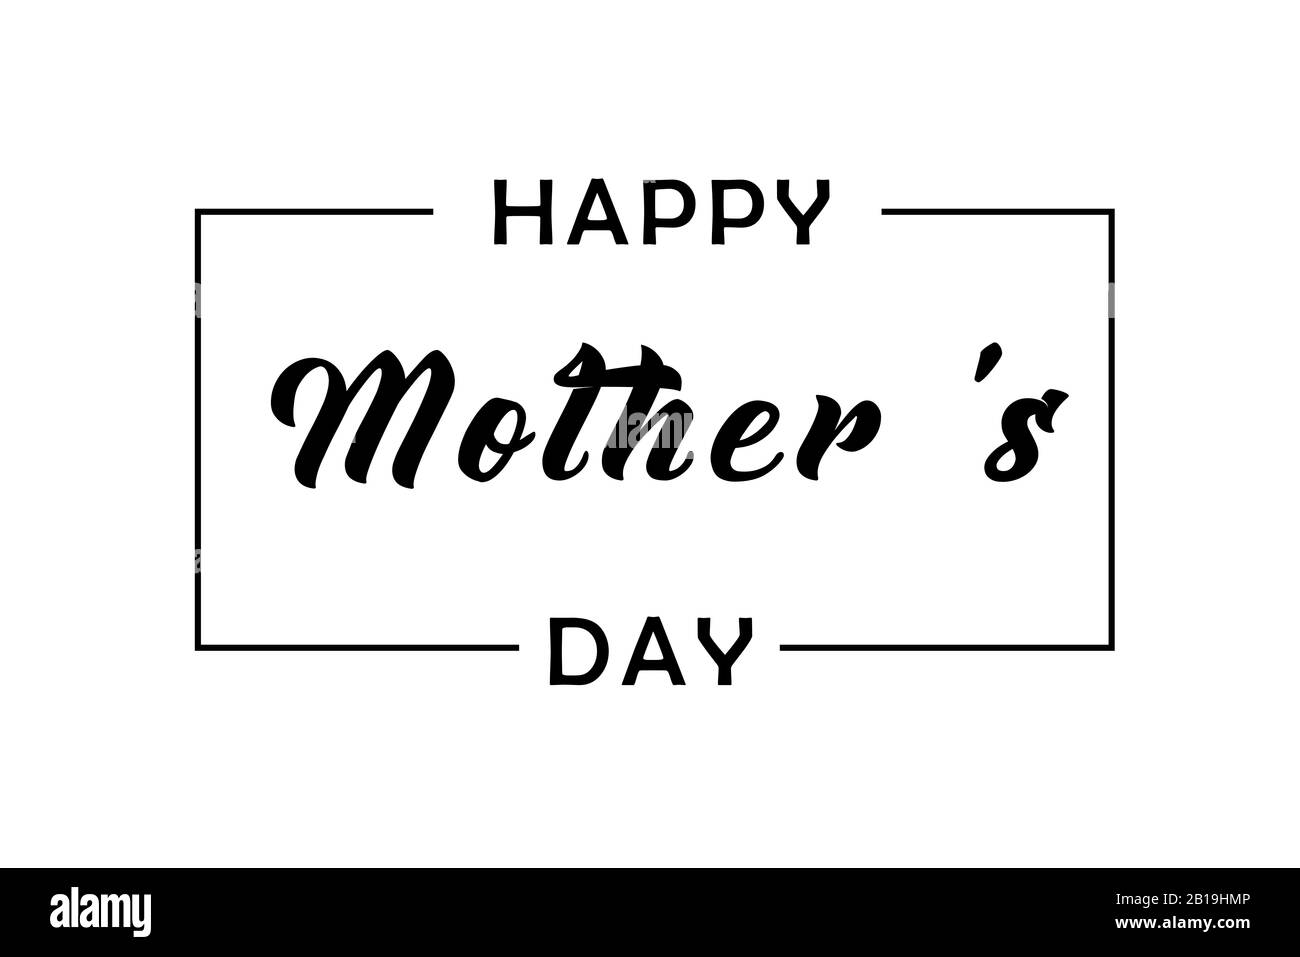 https://c8.alamy.com/comp/2B19HMP/happy-mothers-day-elegant-black-lettering-greeting-card-calligraphy-text-in-frame-background-for-mothers-day-best-mom-ever-greeting-card-2B19HMP.jpg